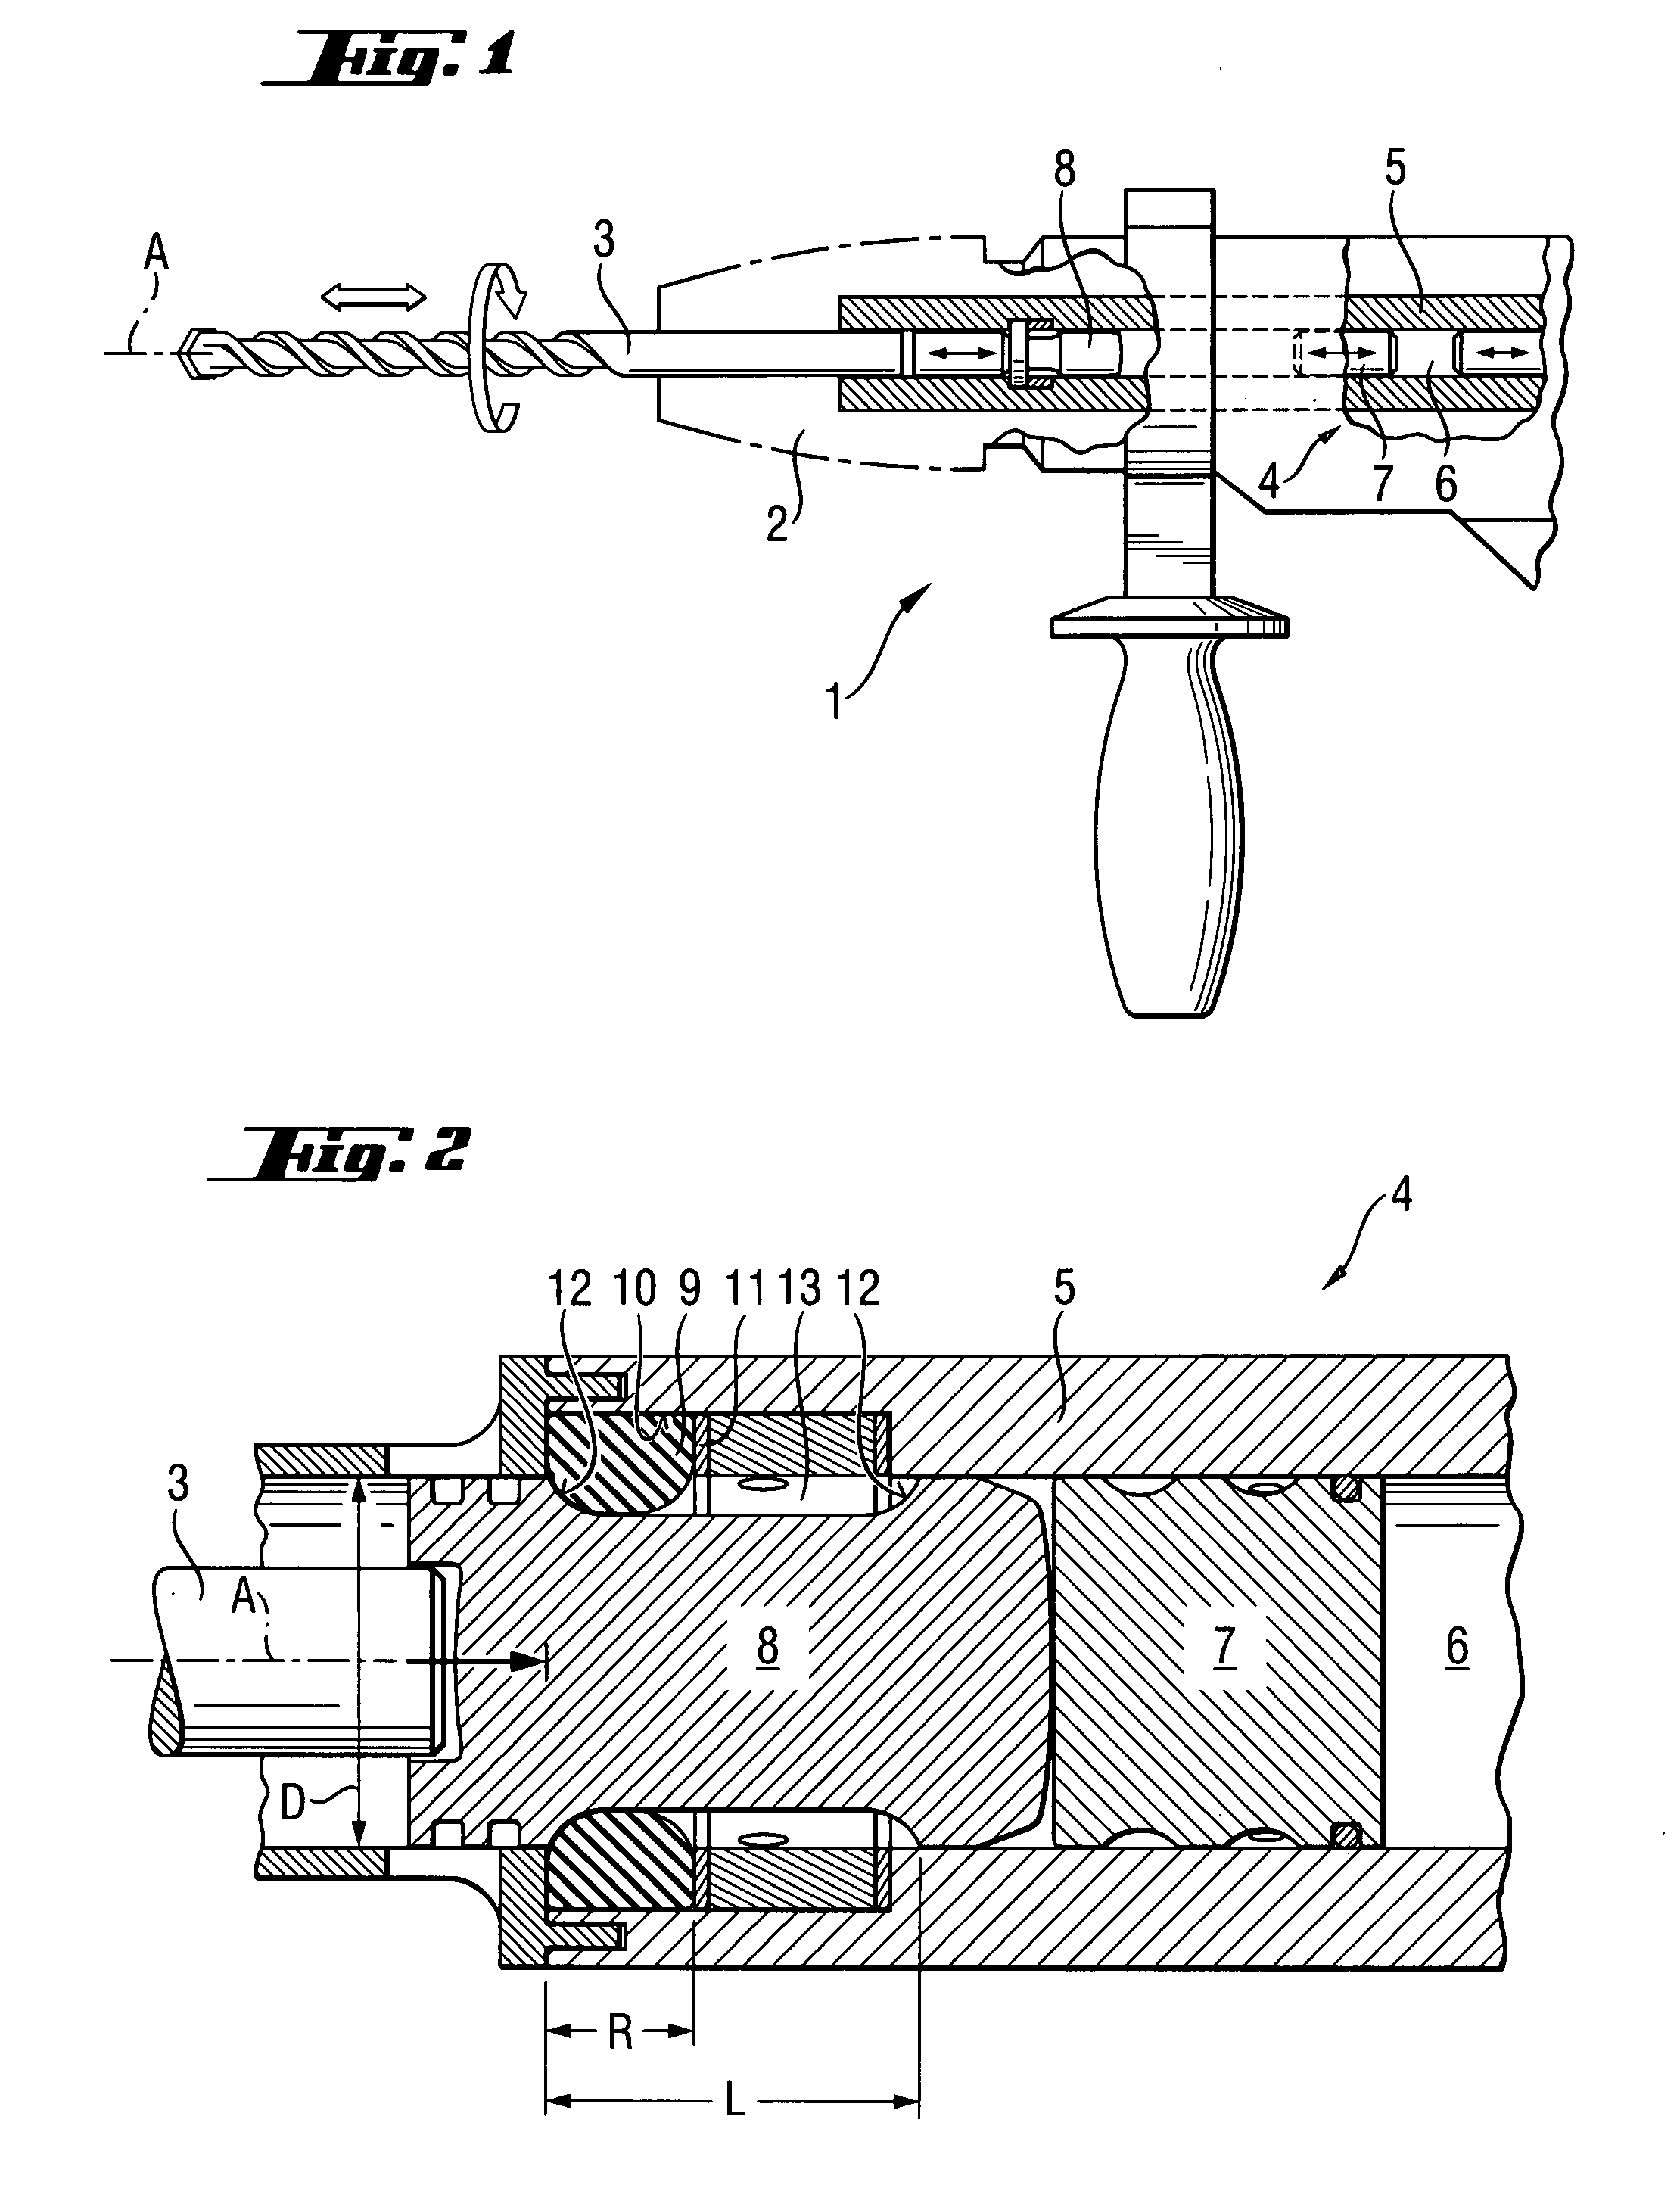 Hand-held power tool with pneumatic percussion mechanism